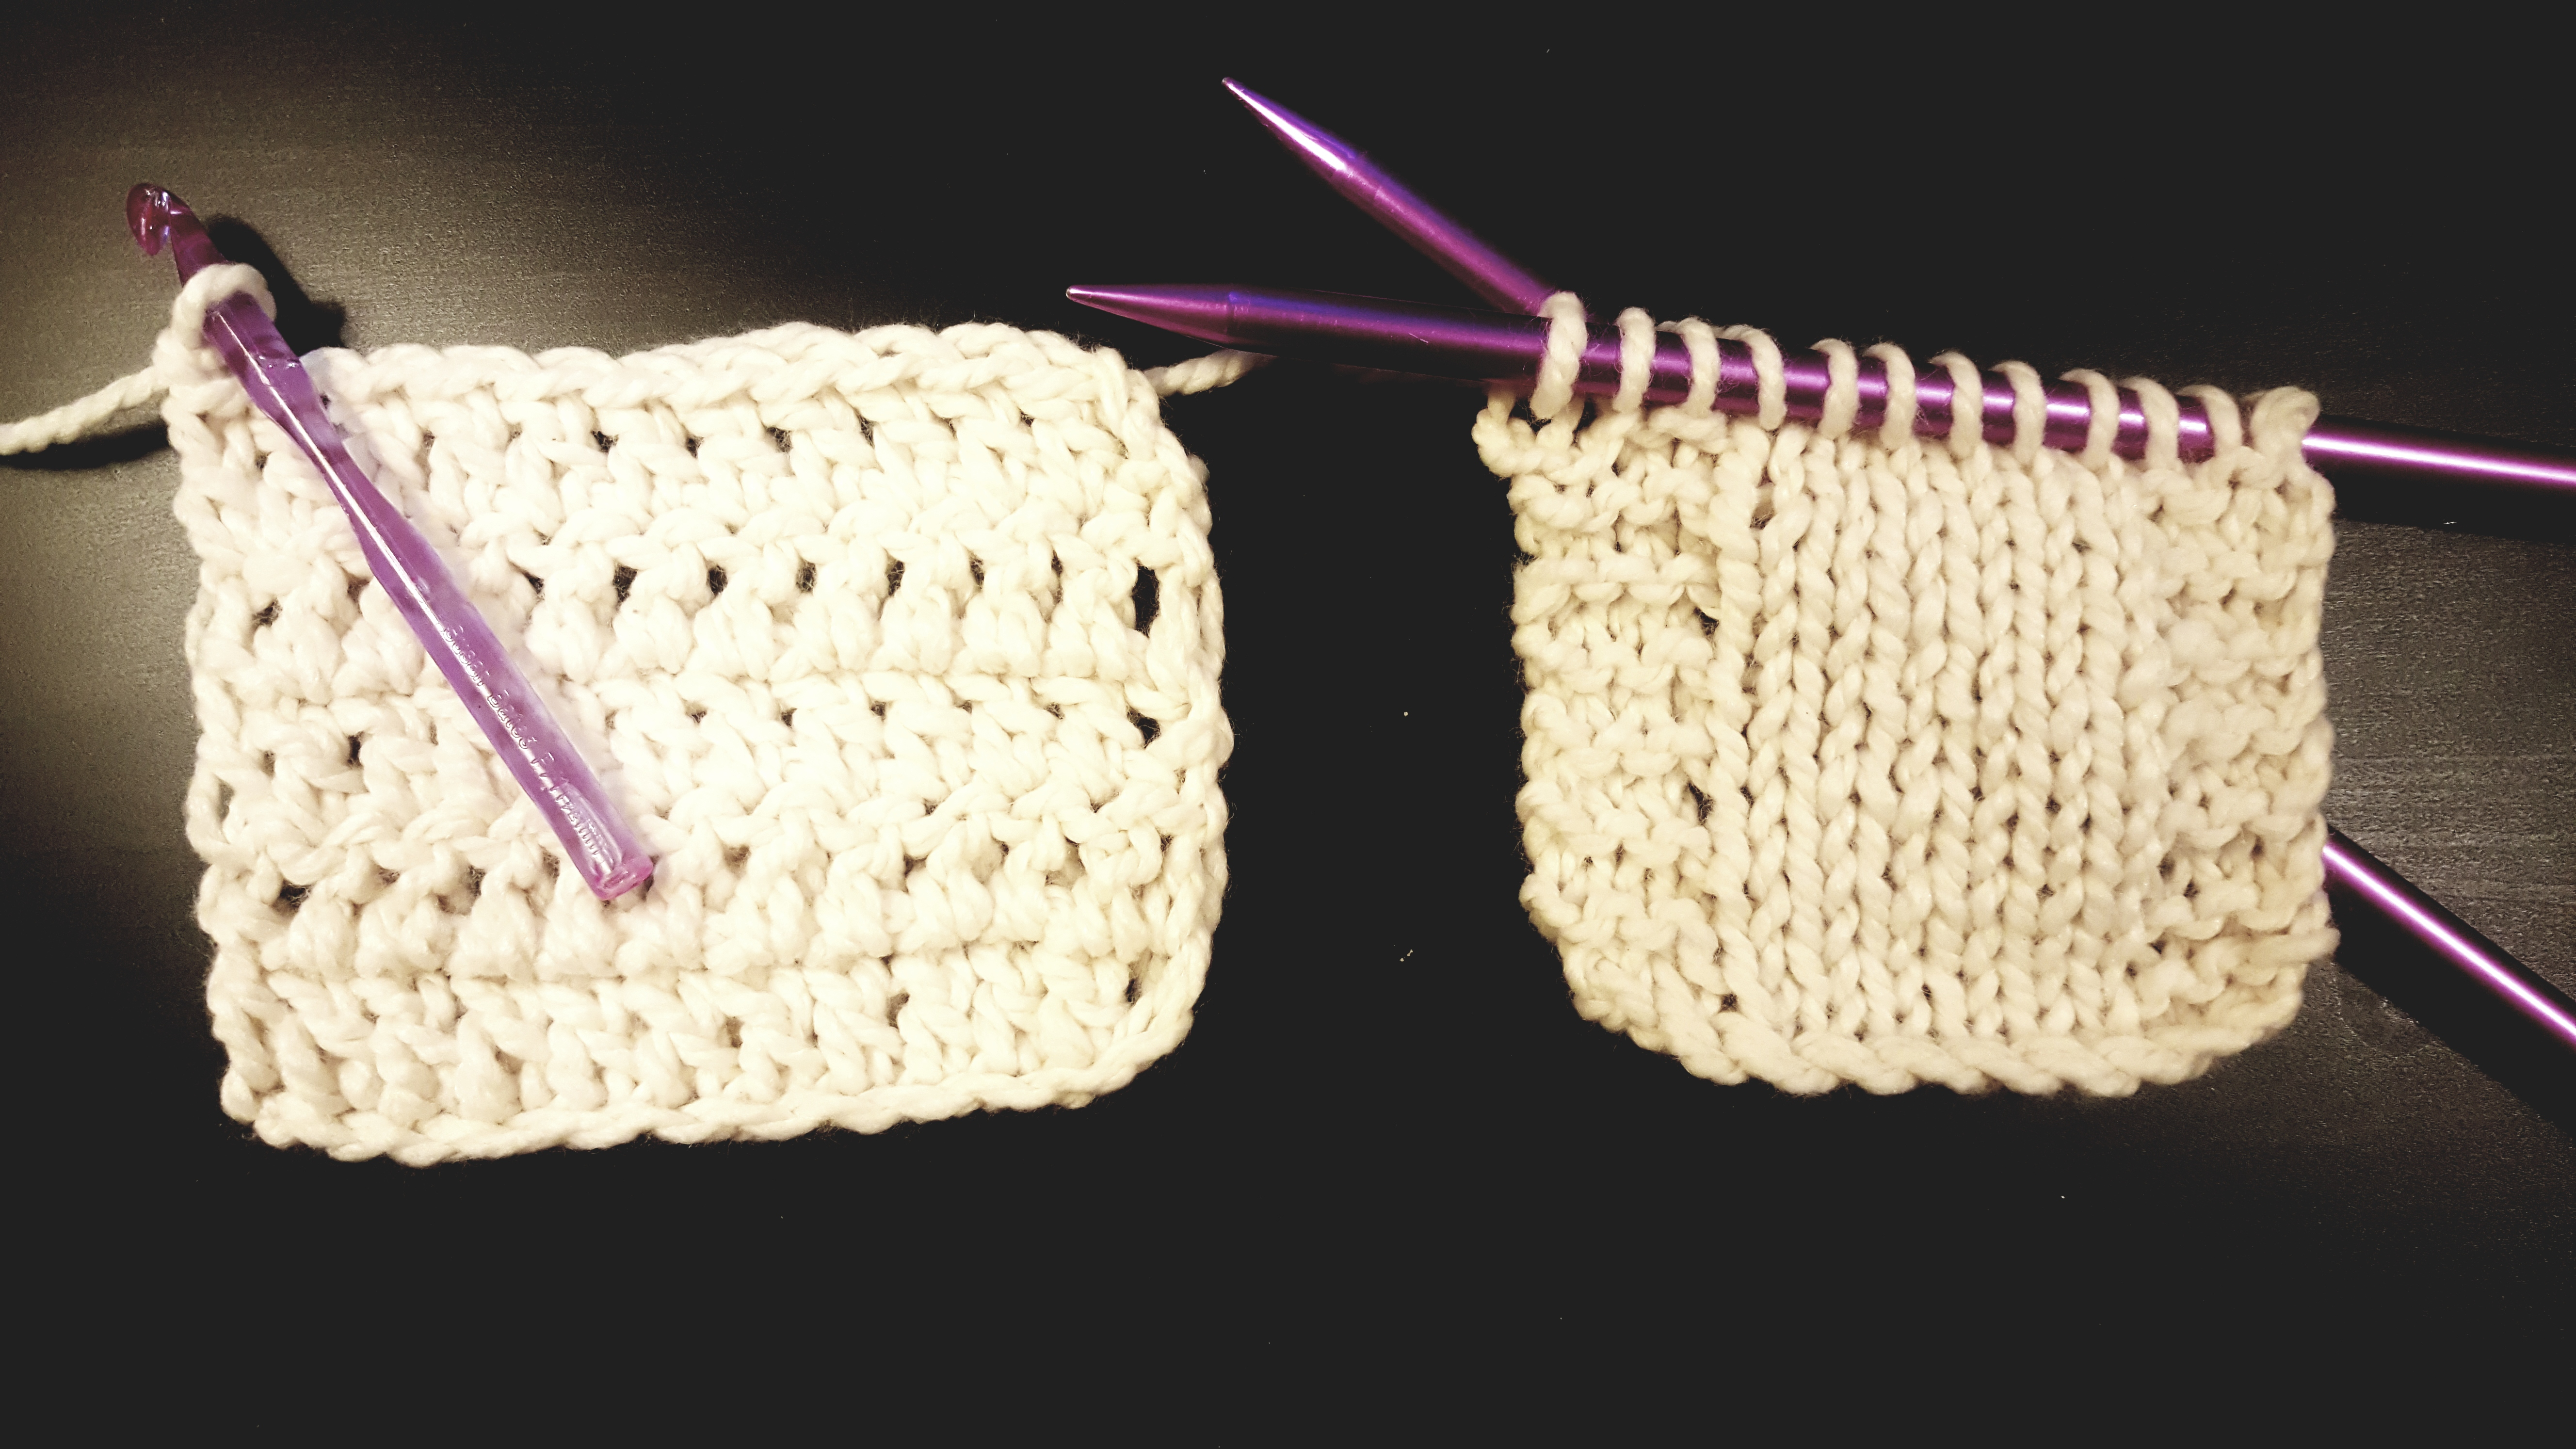 Knit And Crochet Now Patterns Knitting Vs Crocheting Which Is Better Which Is Harder